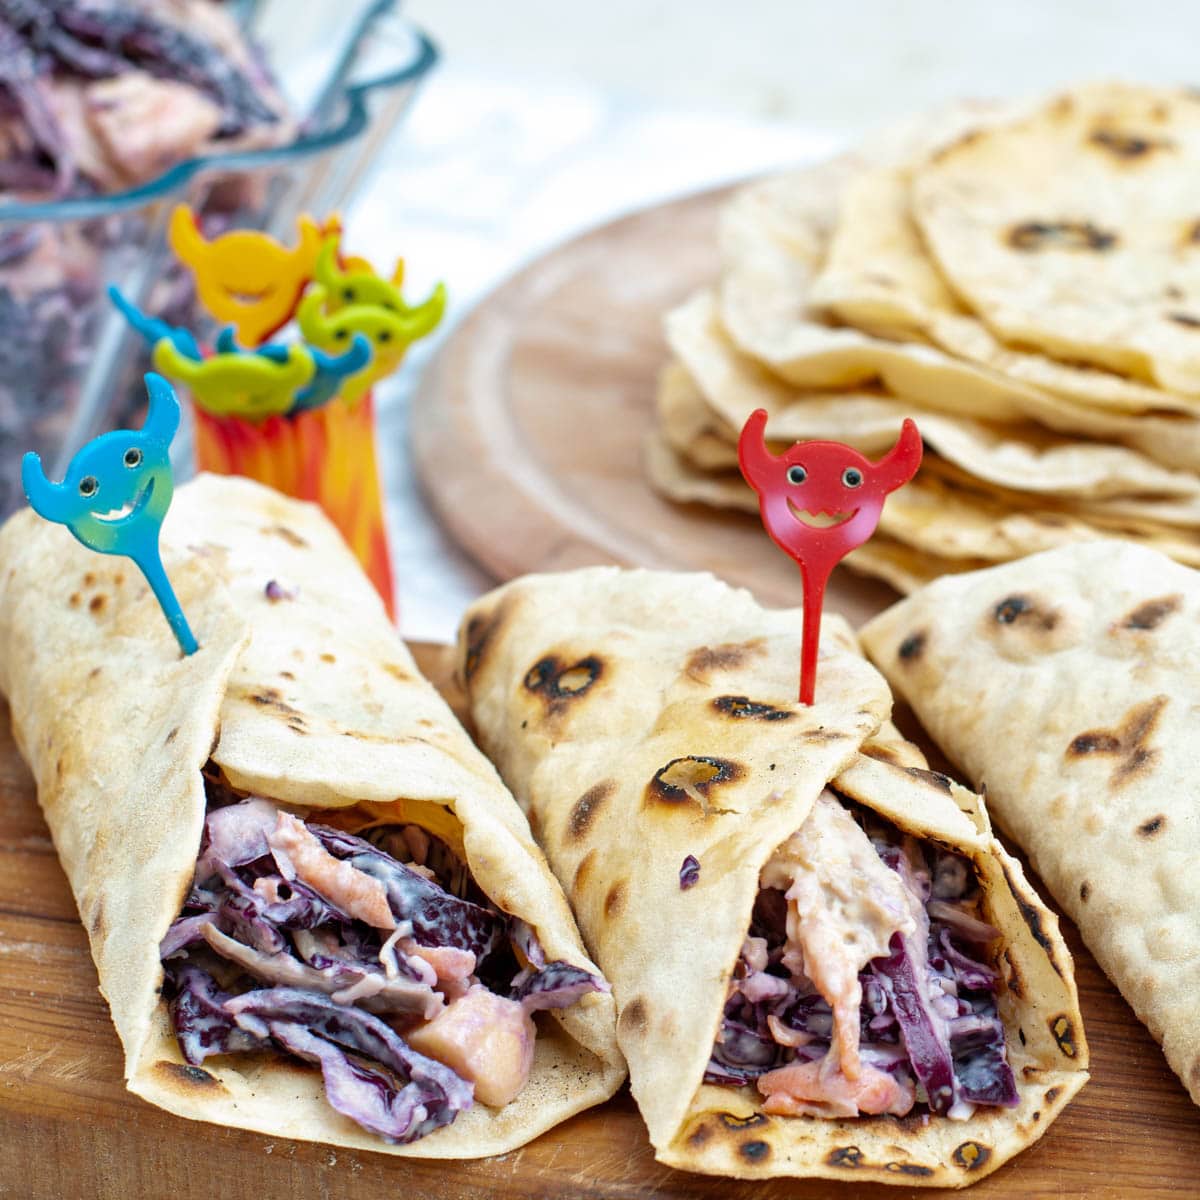 Healthy chicken wraps on a wooden cutting board with some joyful sticks